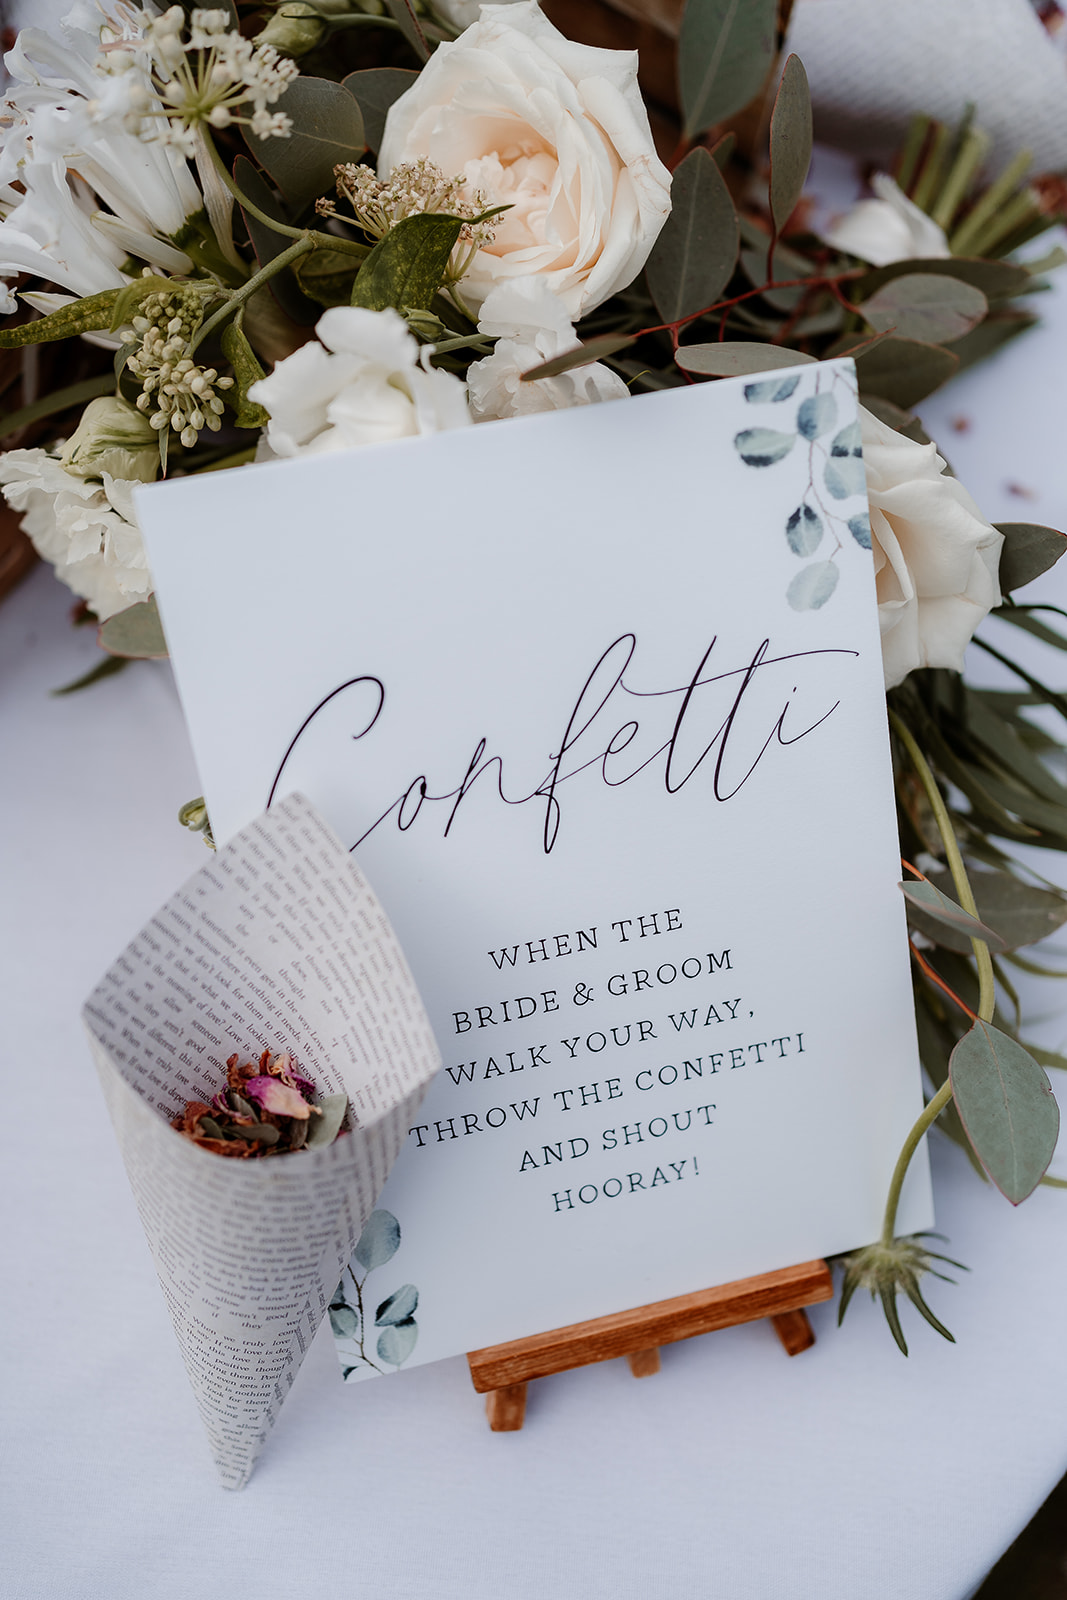 Sign for confetti throw at a Sandy Cove Hotel wedding